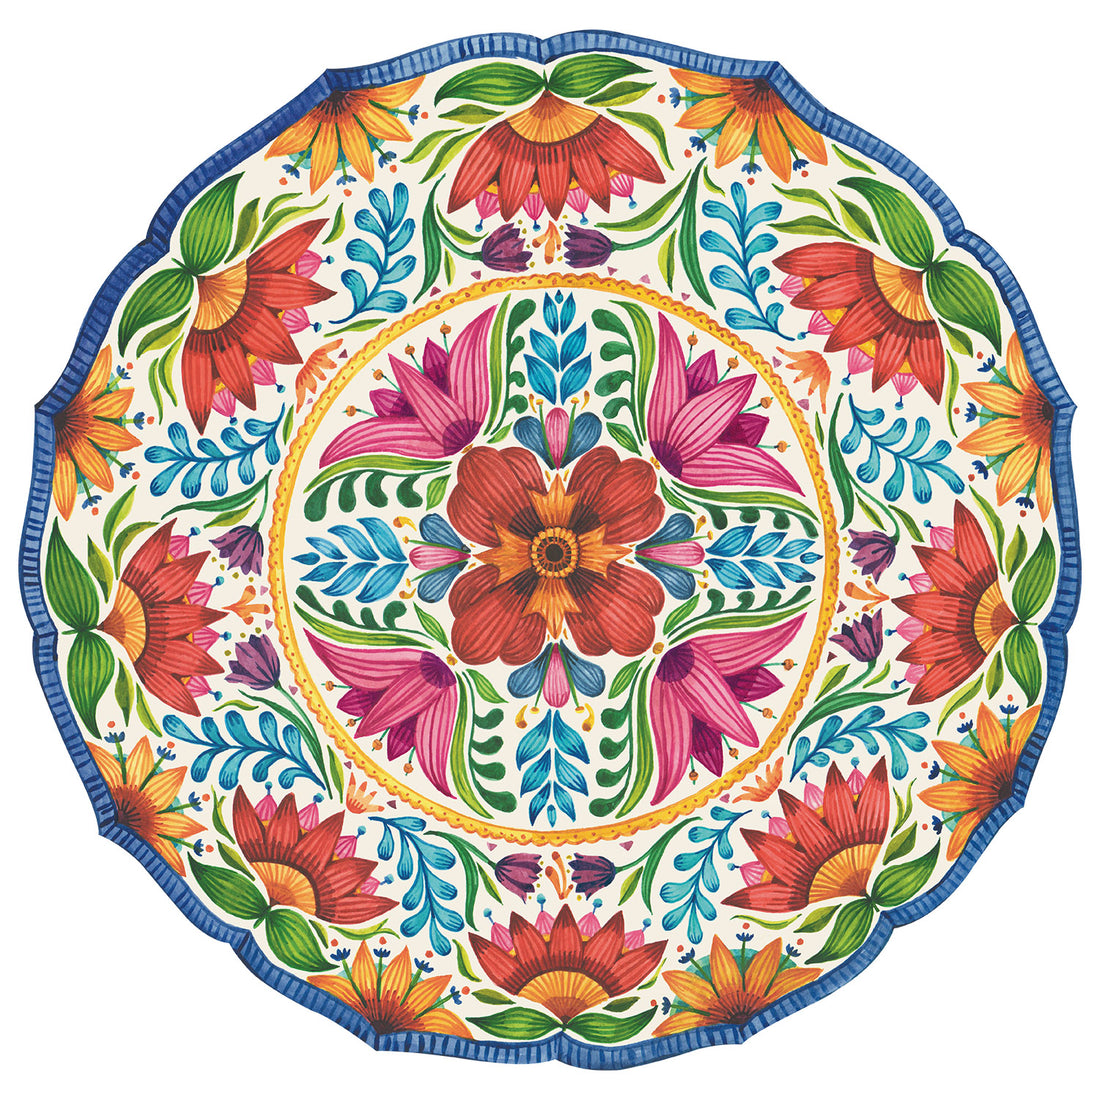 A vibrant, round mandala design with scalloped edges, featuring stylized flowers and foliage in pink, red, orange, yellow, green, blue and purple on a white background.